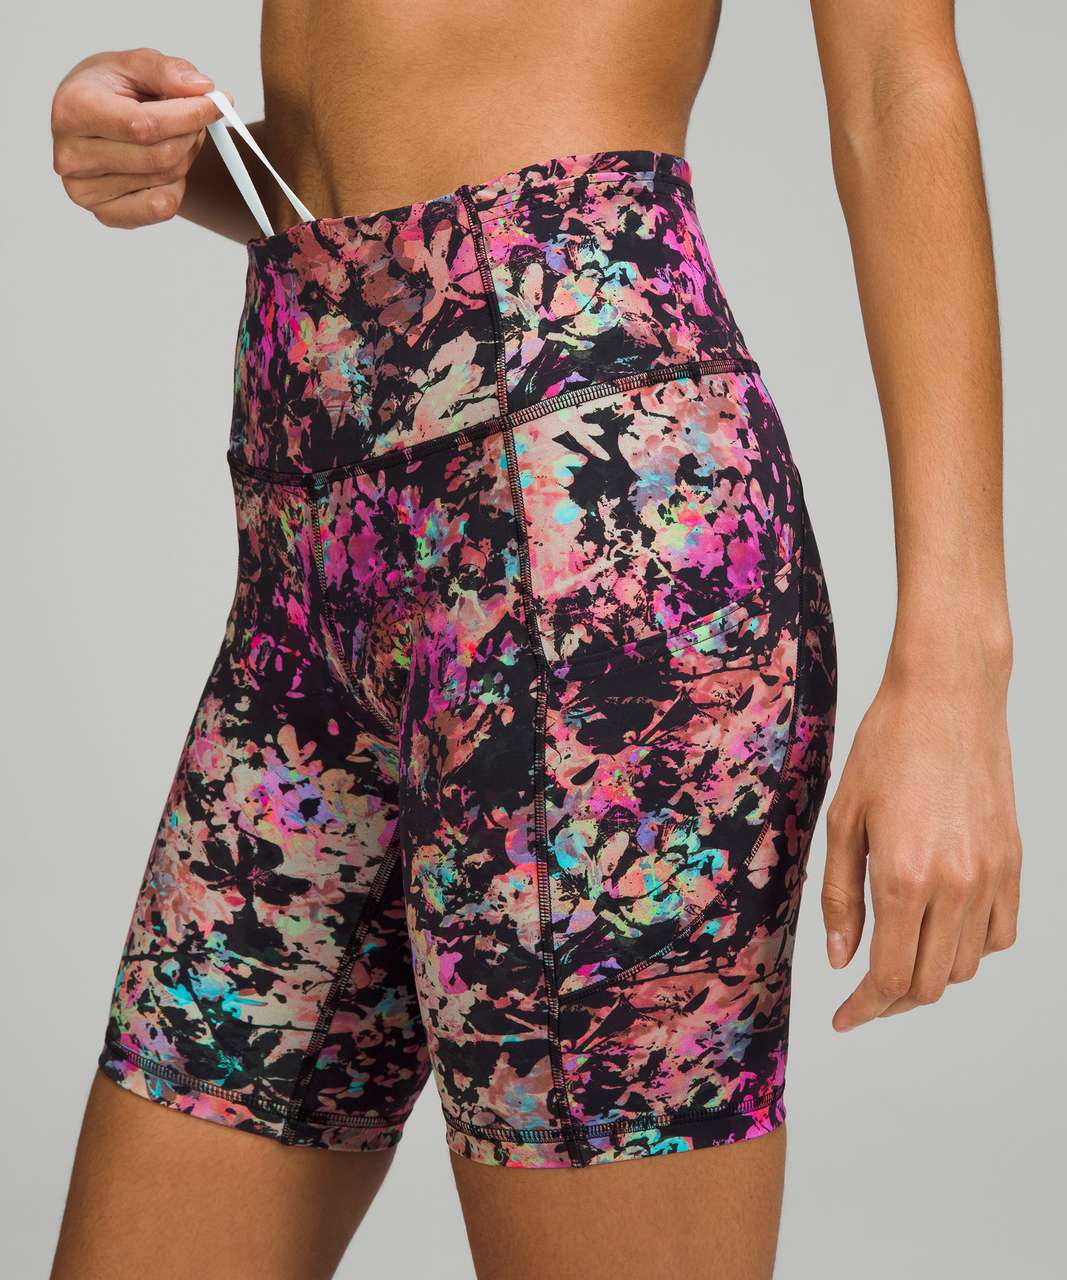 Lululemon Fast and Free High-Rise Short 8" - Stencil Blossom Red Multi